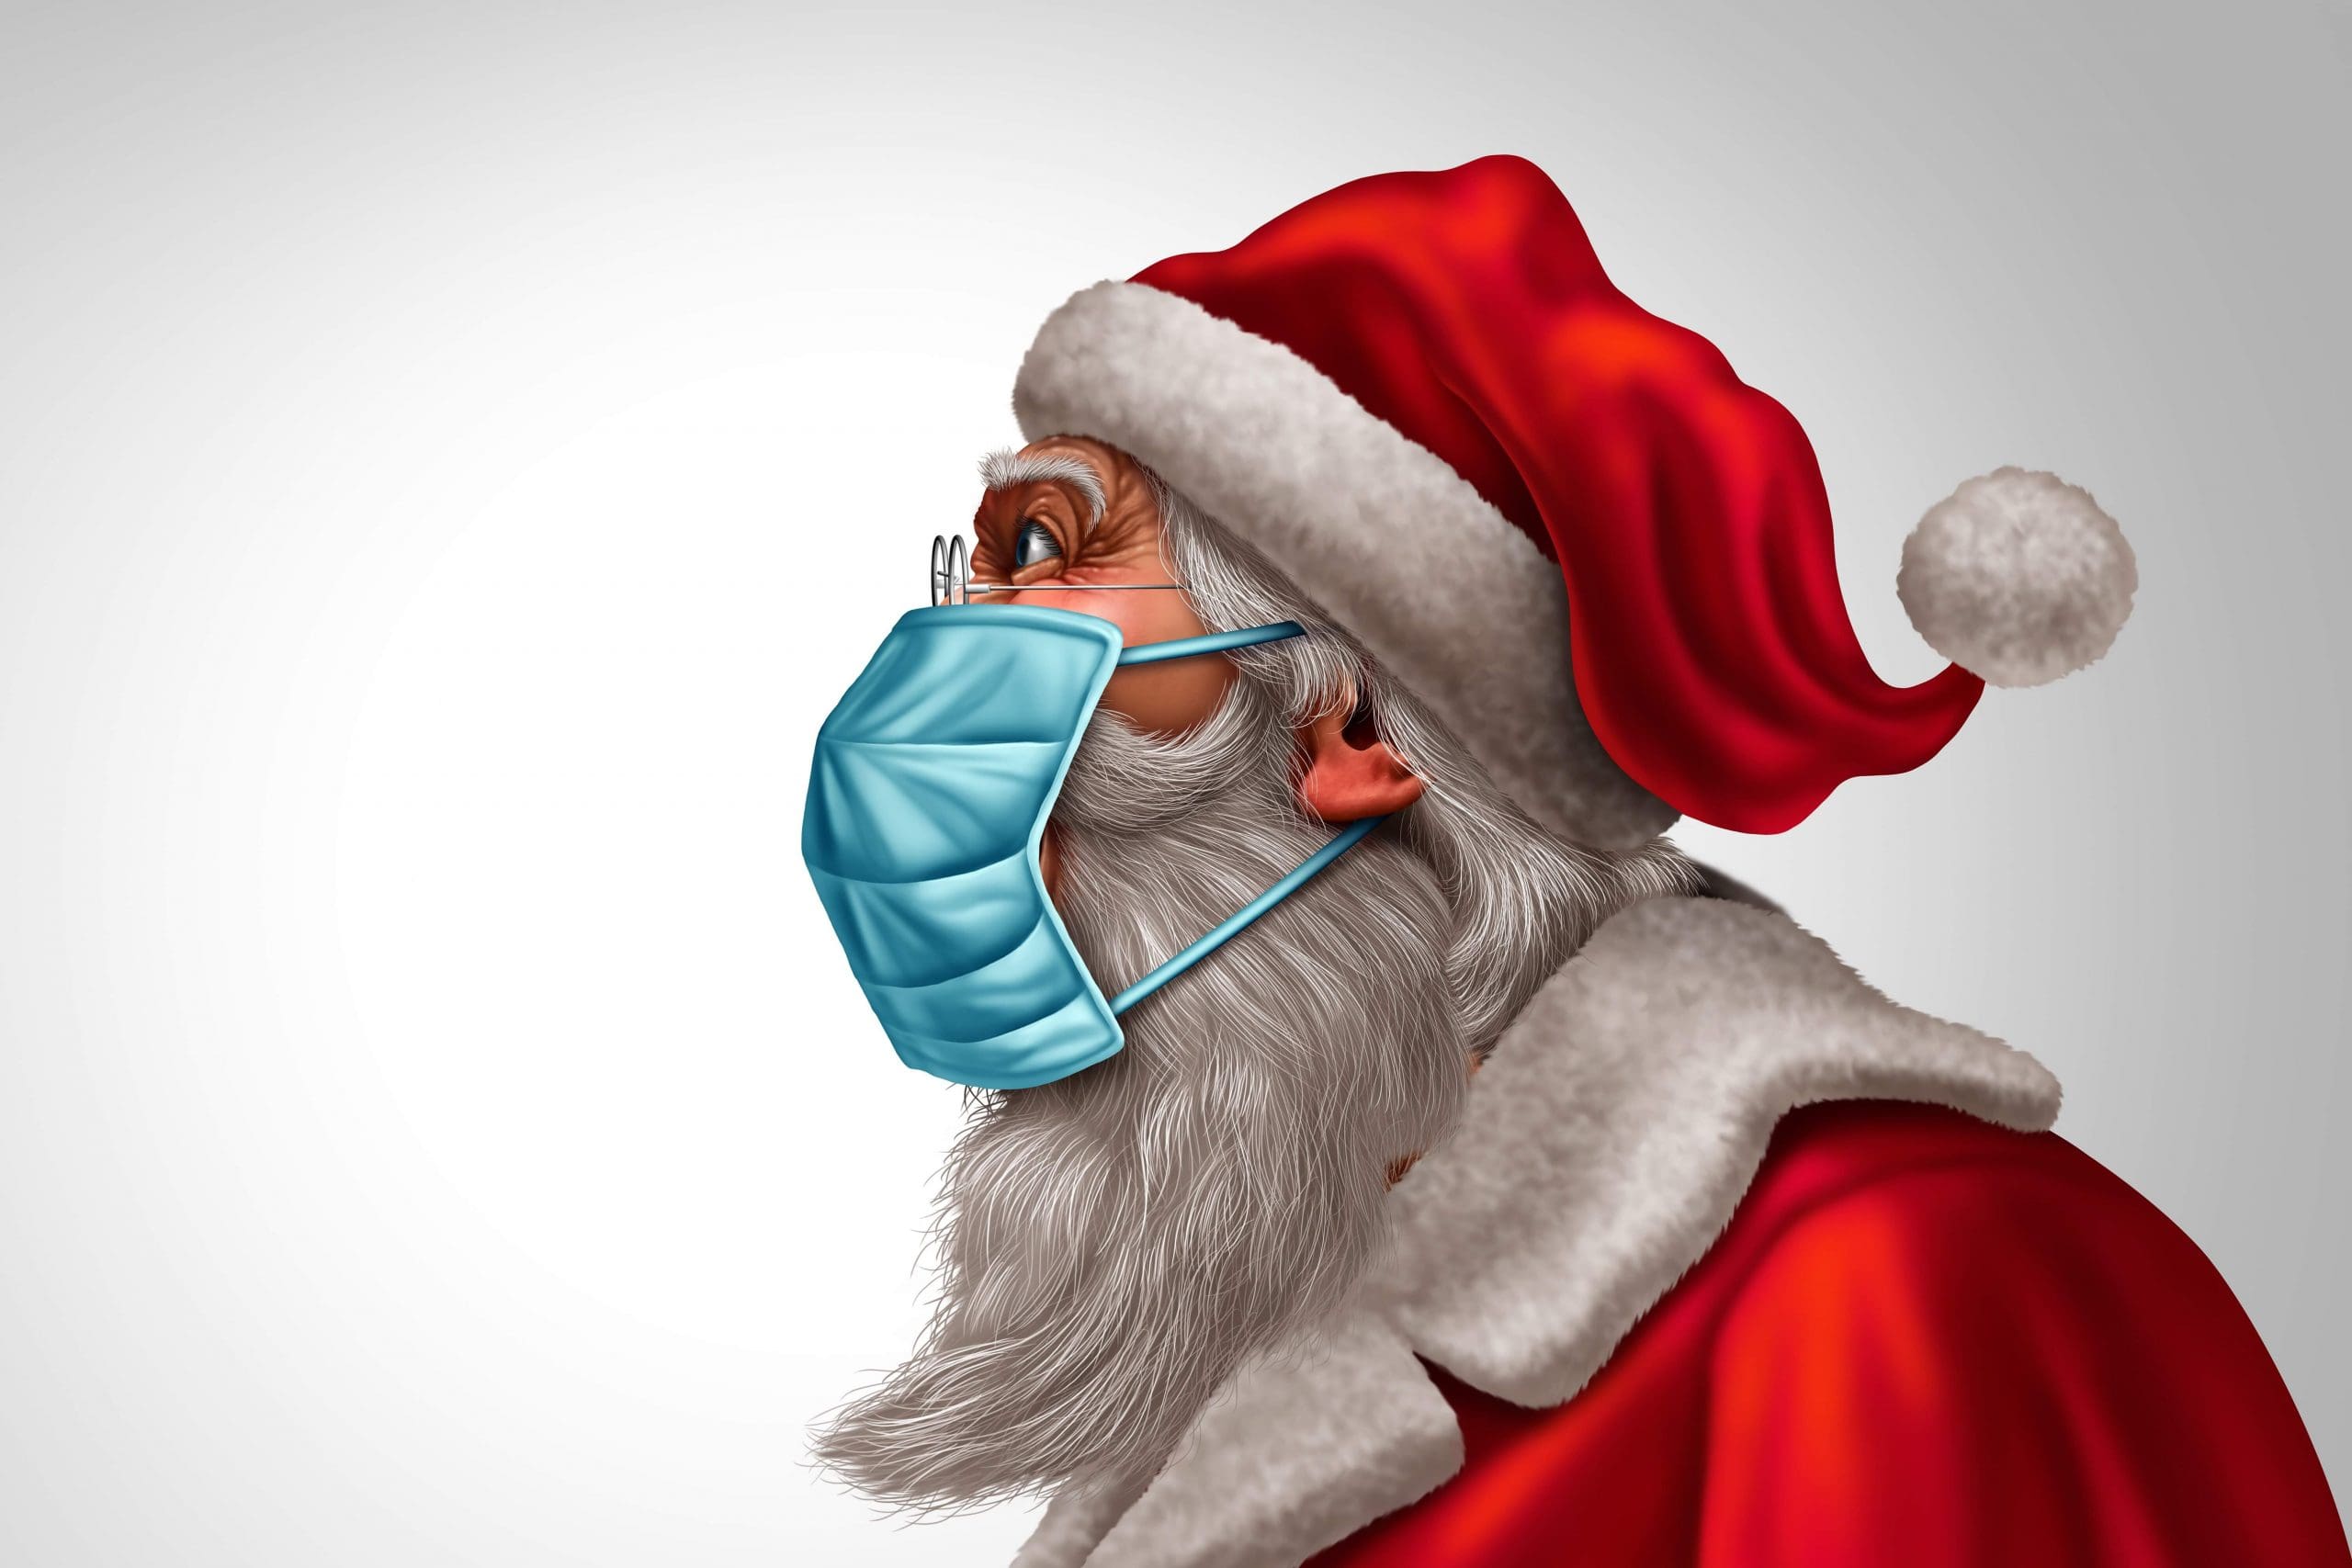 Illustration of Santa Claus wearing a blue surgical mask